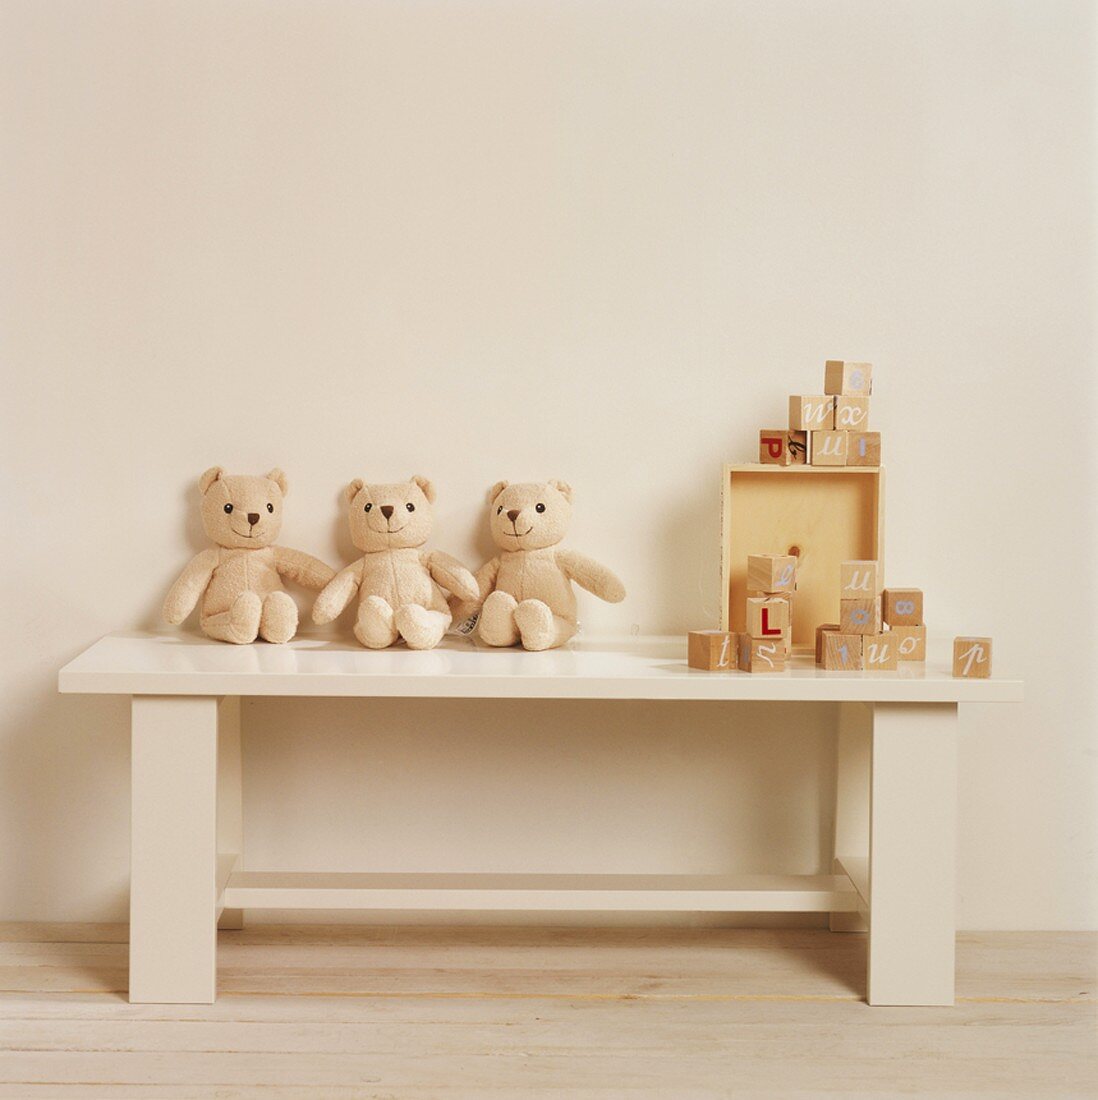 Teddy bears and toys on a bench